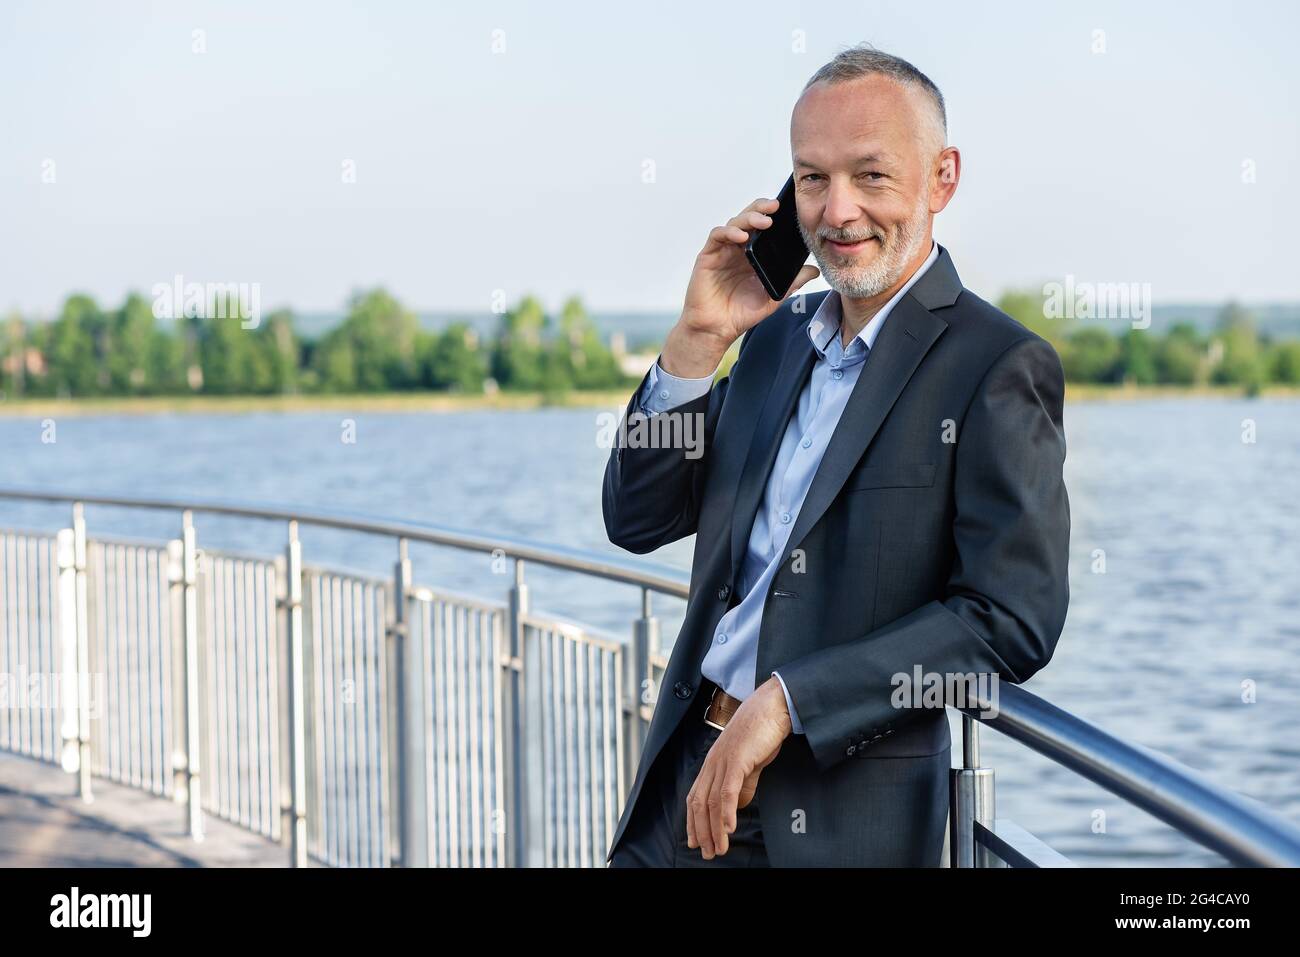 Smiling businessman in a gray suit with a smartphone. Stock Photo